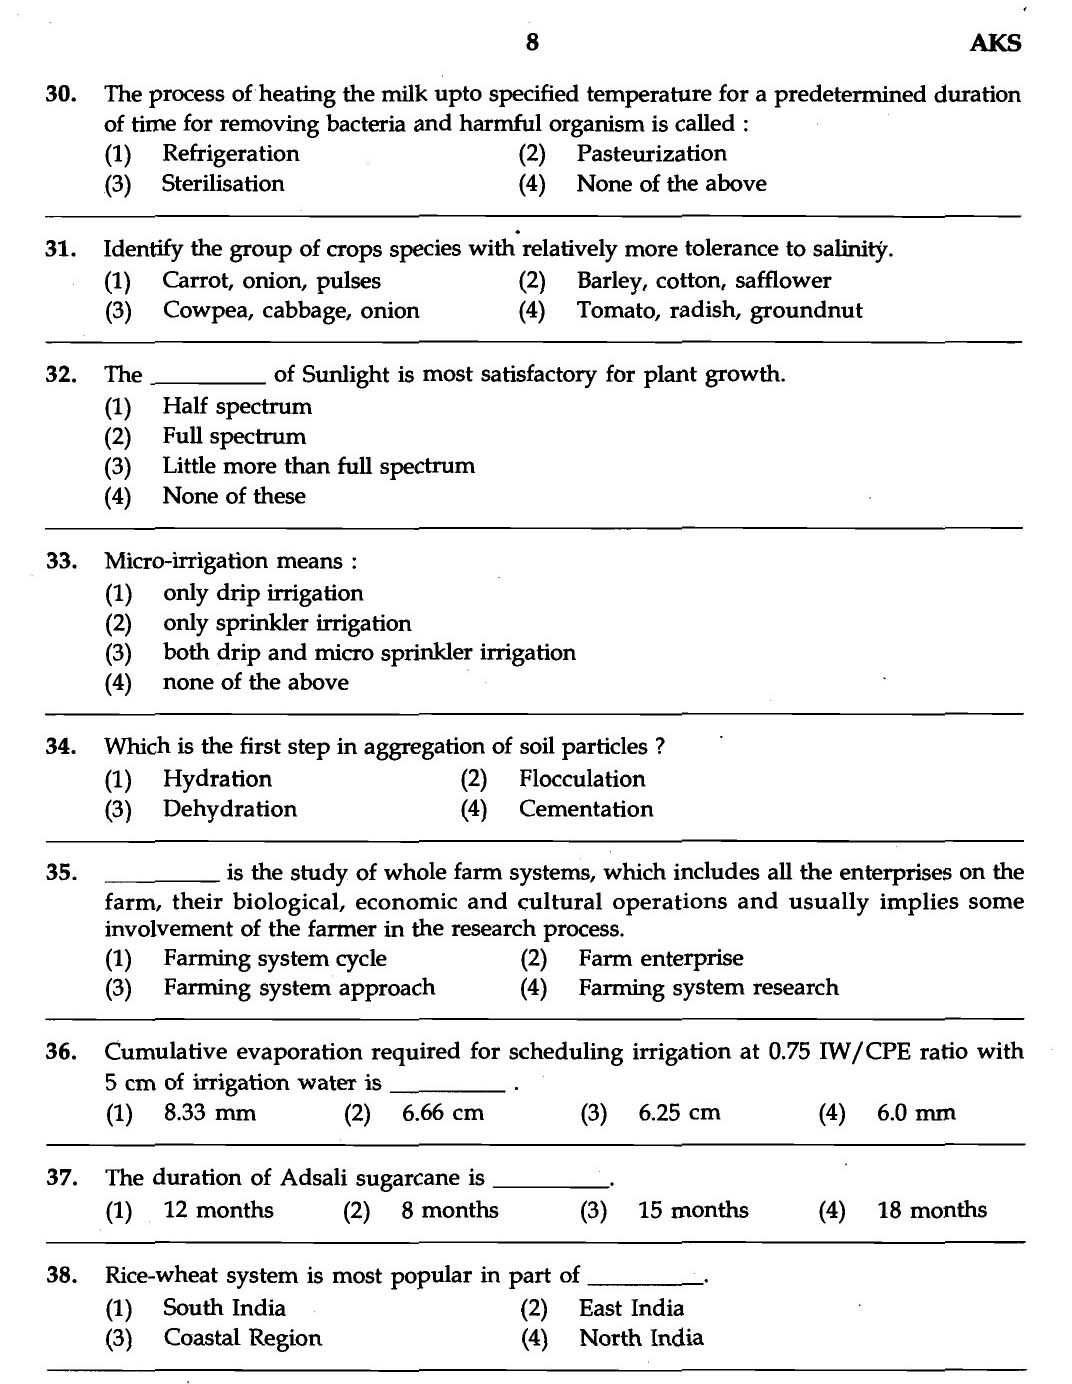 MPSC Agricultural Services Exam 2007 Question Paper Agricultural Science 6